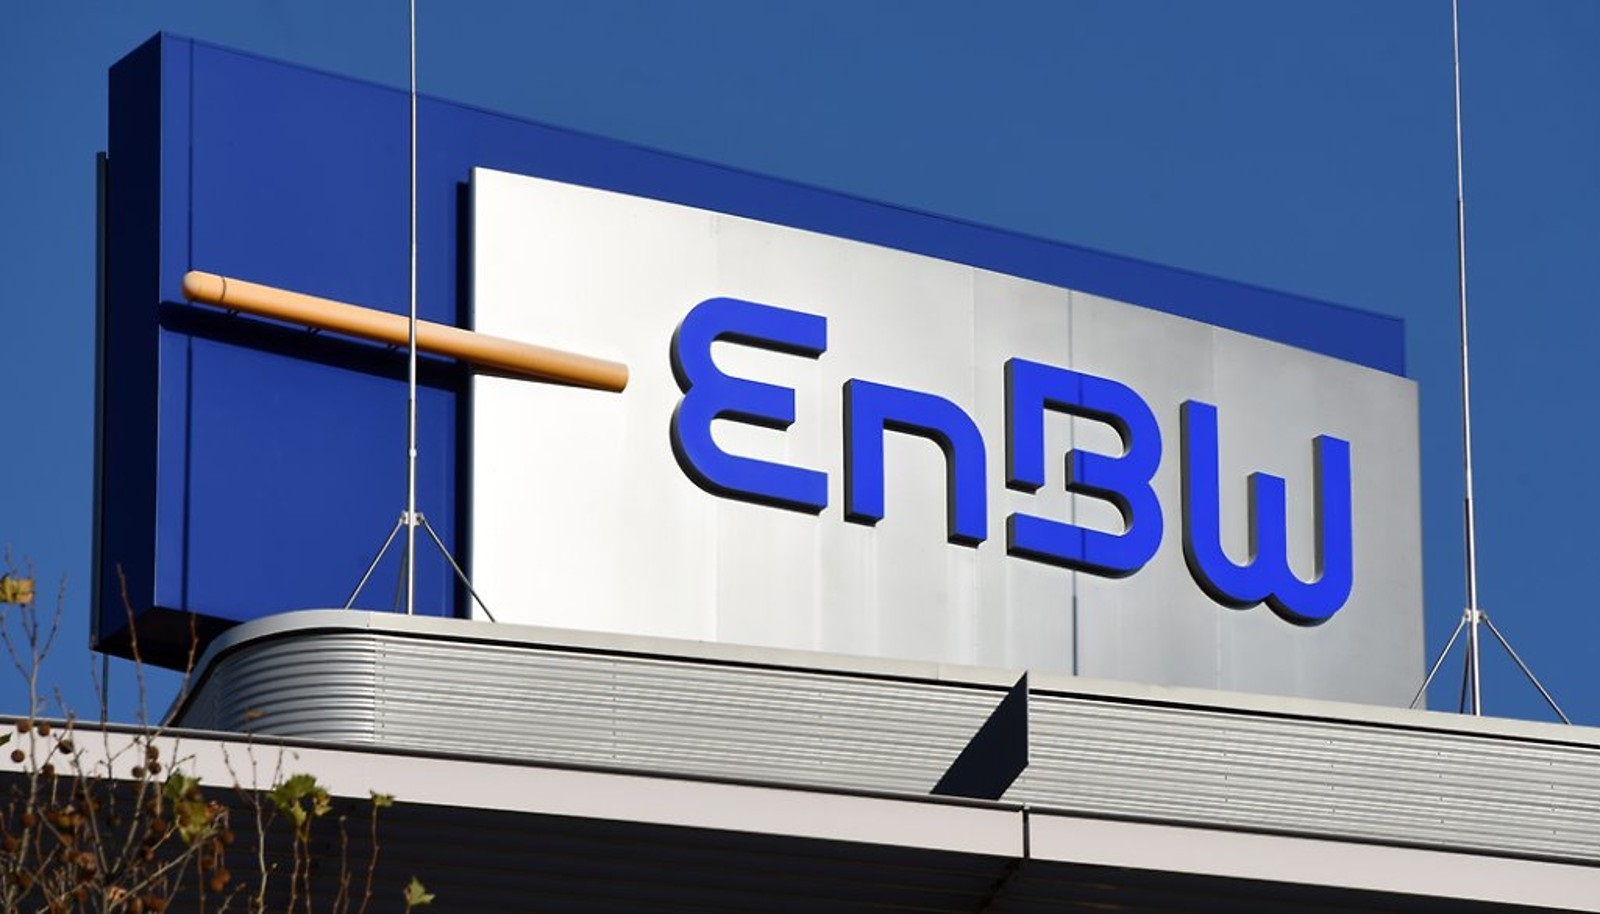 EnBW Aims to Be Climate Neutral by 2035, Will Exit Coal-Fired Generation